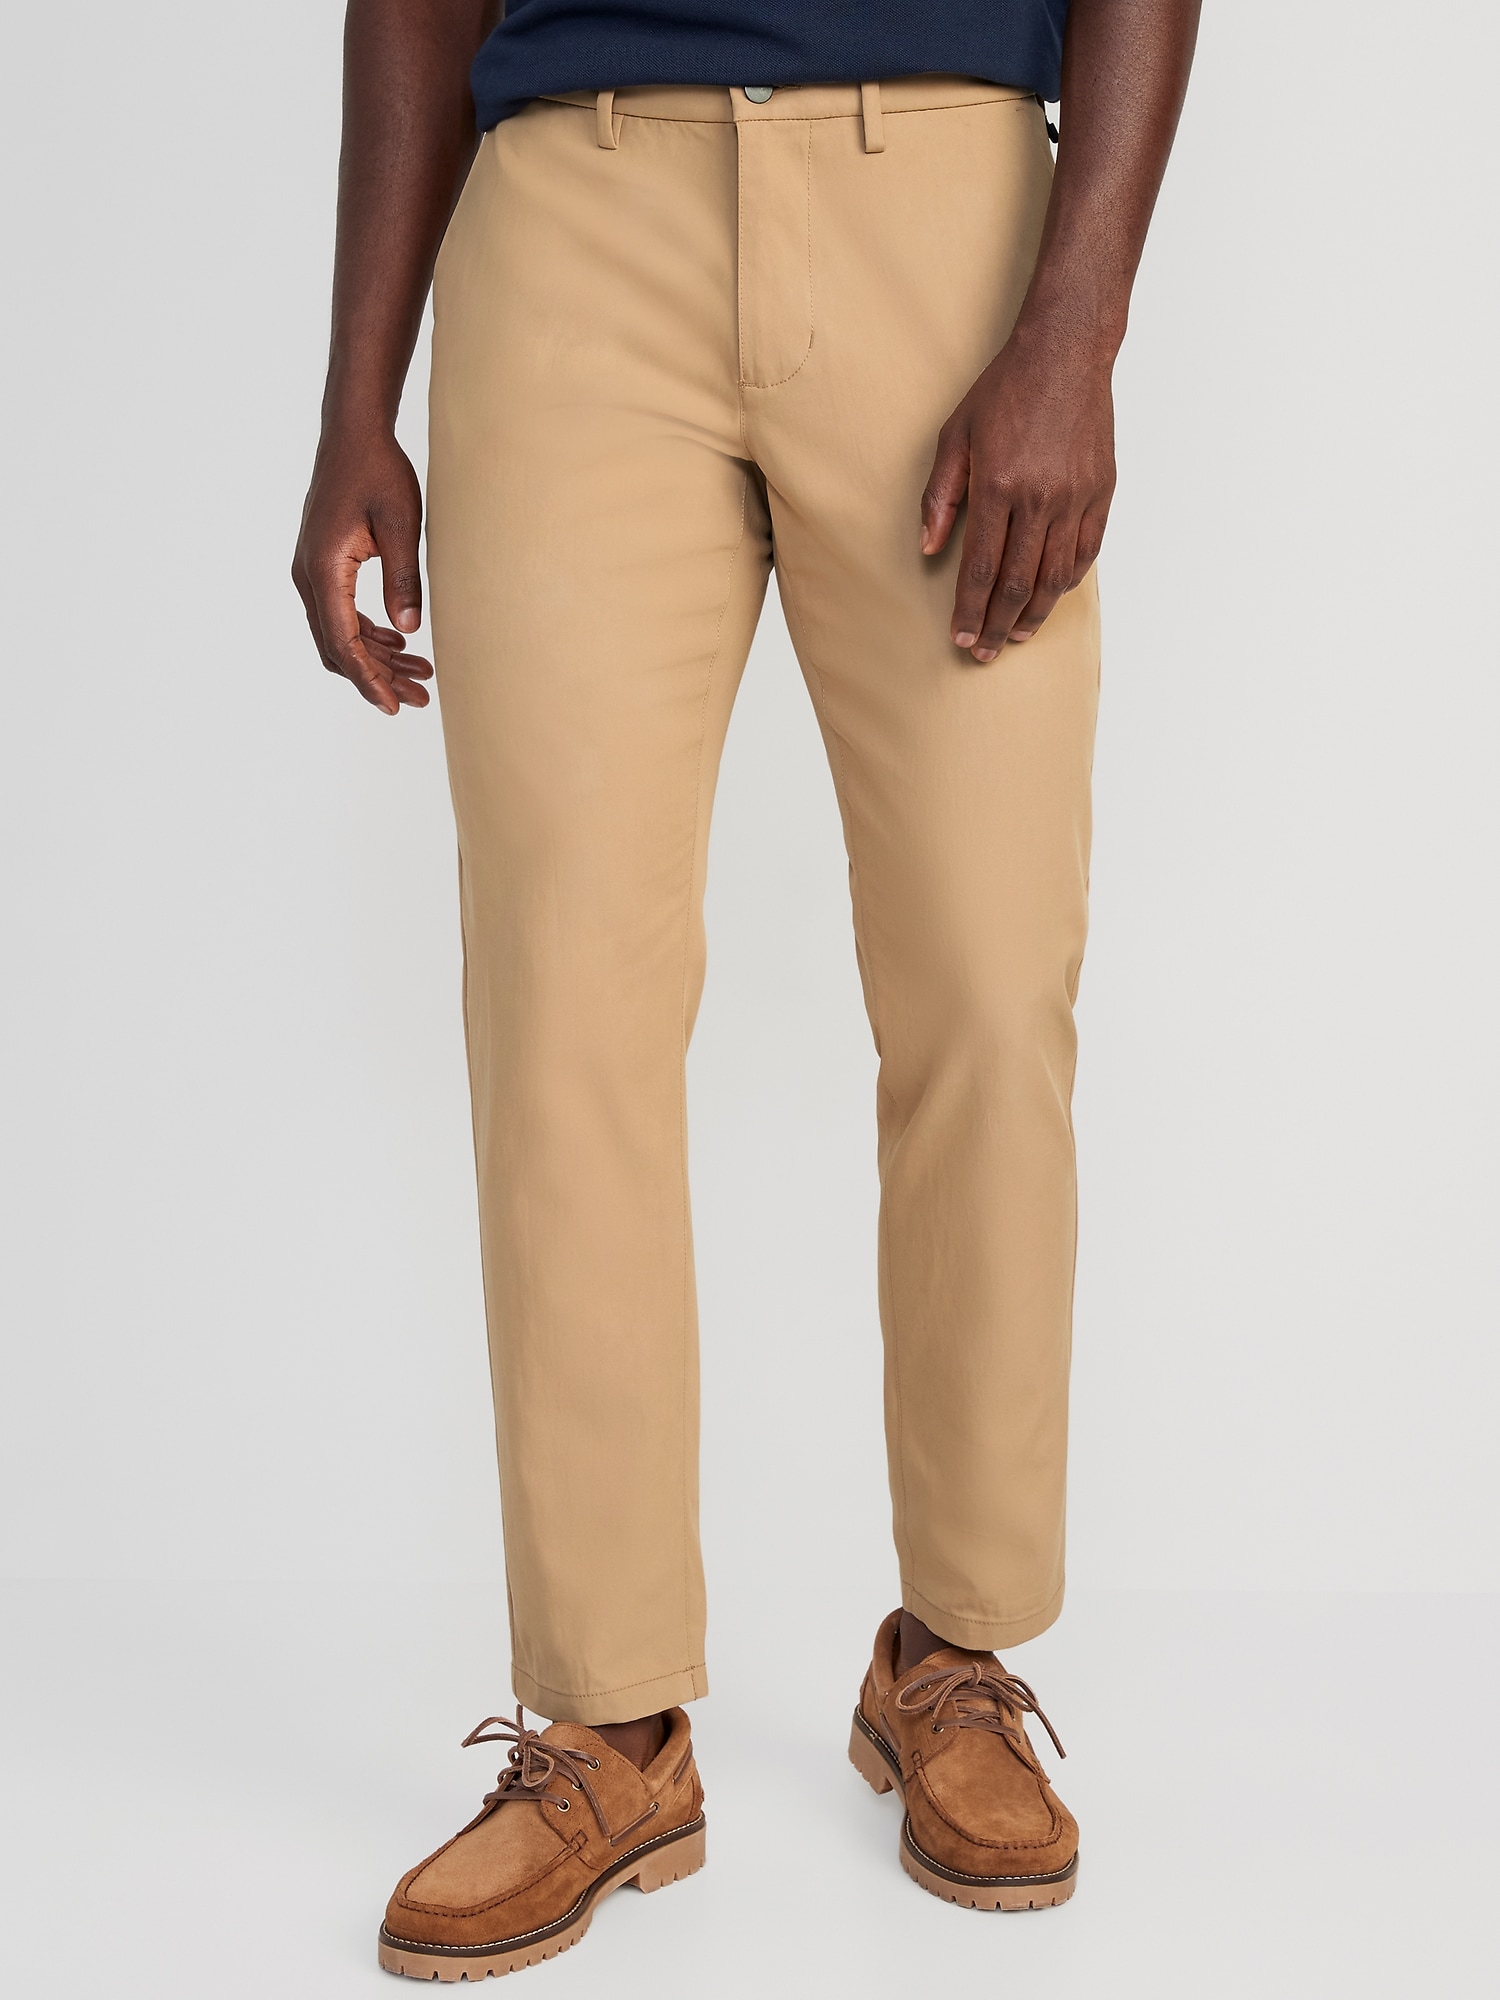 for Built-In | Tech Men Chino Navy Pants Athletic Ultimate Flex Old